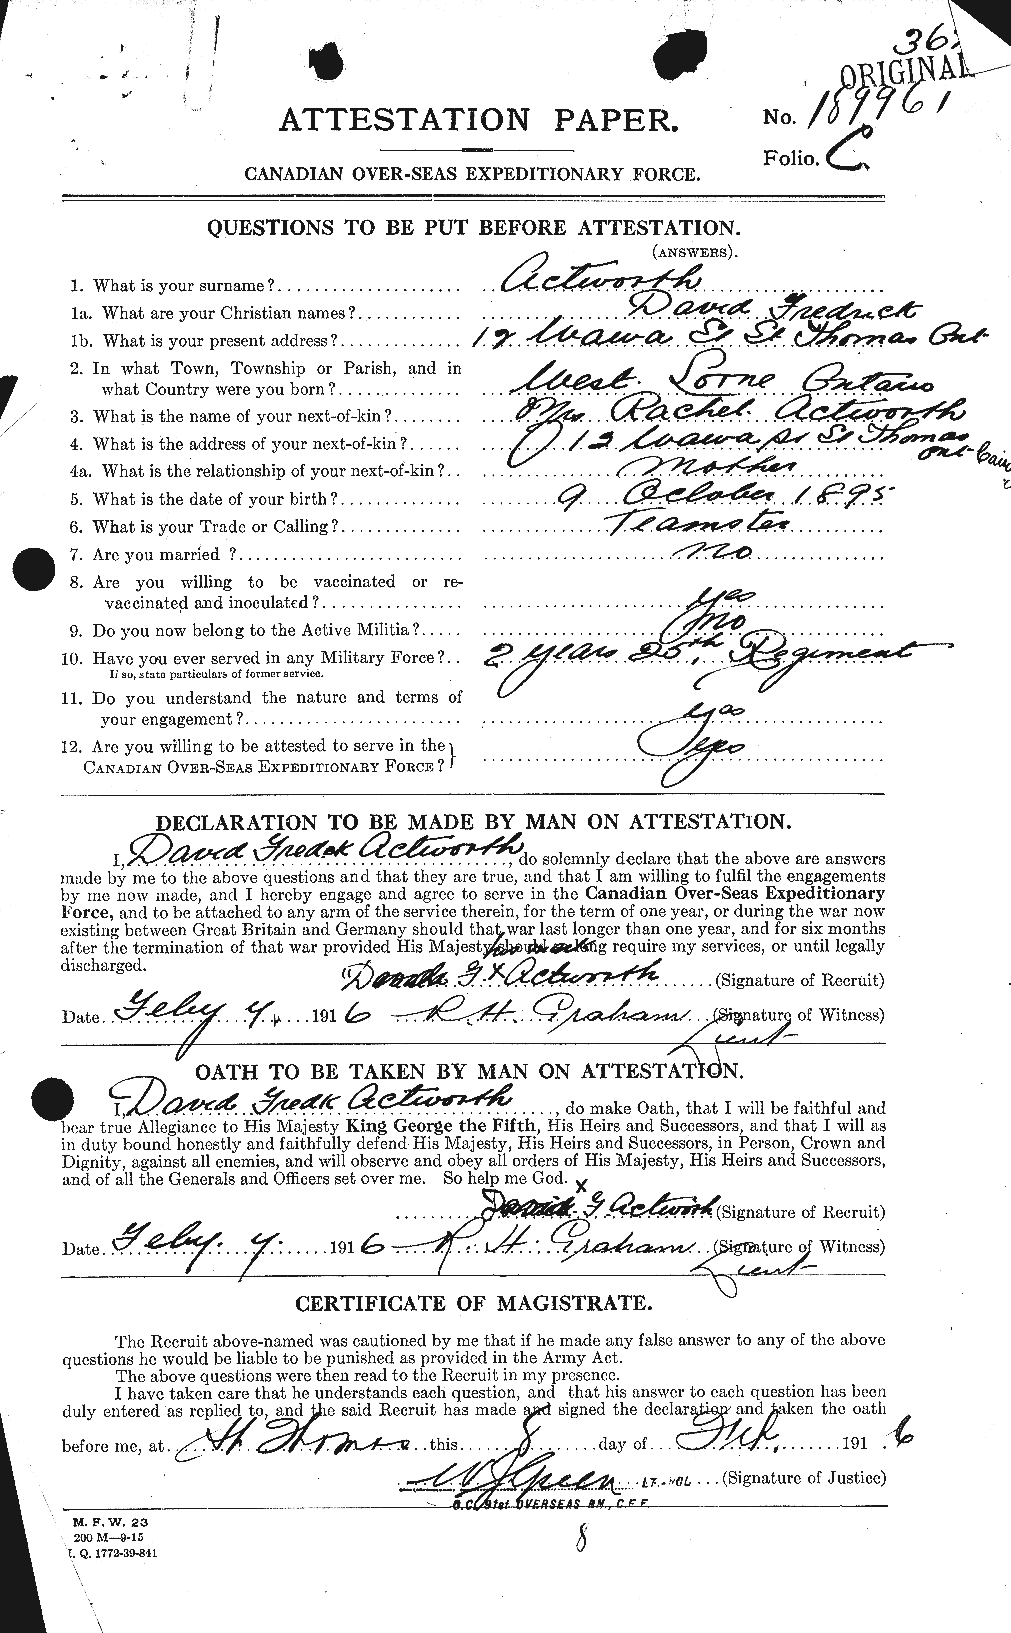 Personnel Records of the First World War - CEF 201046a